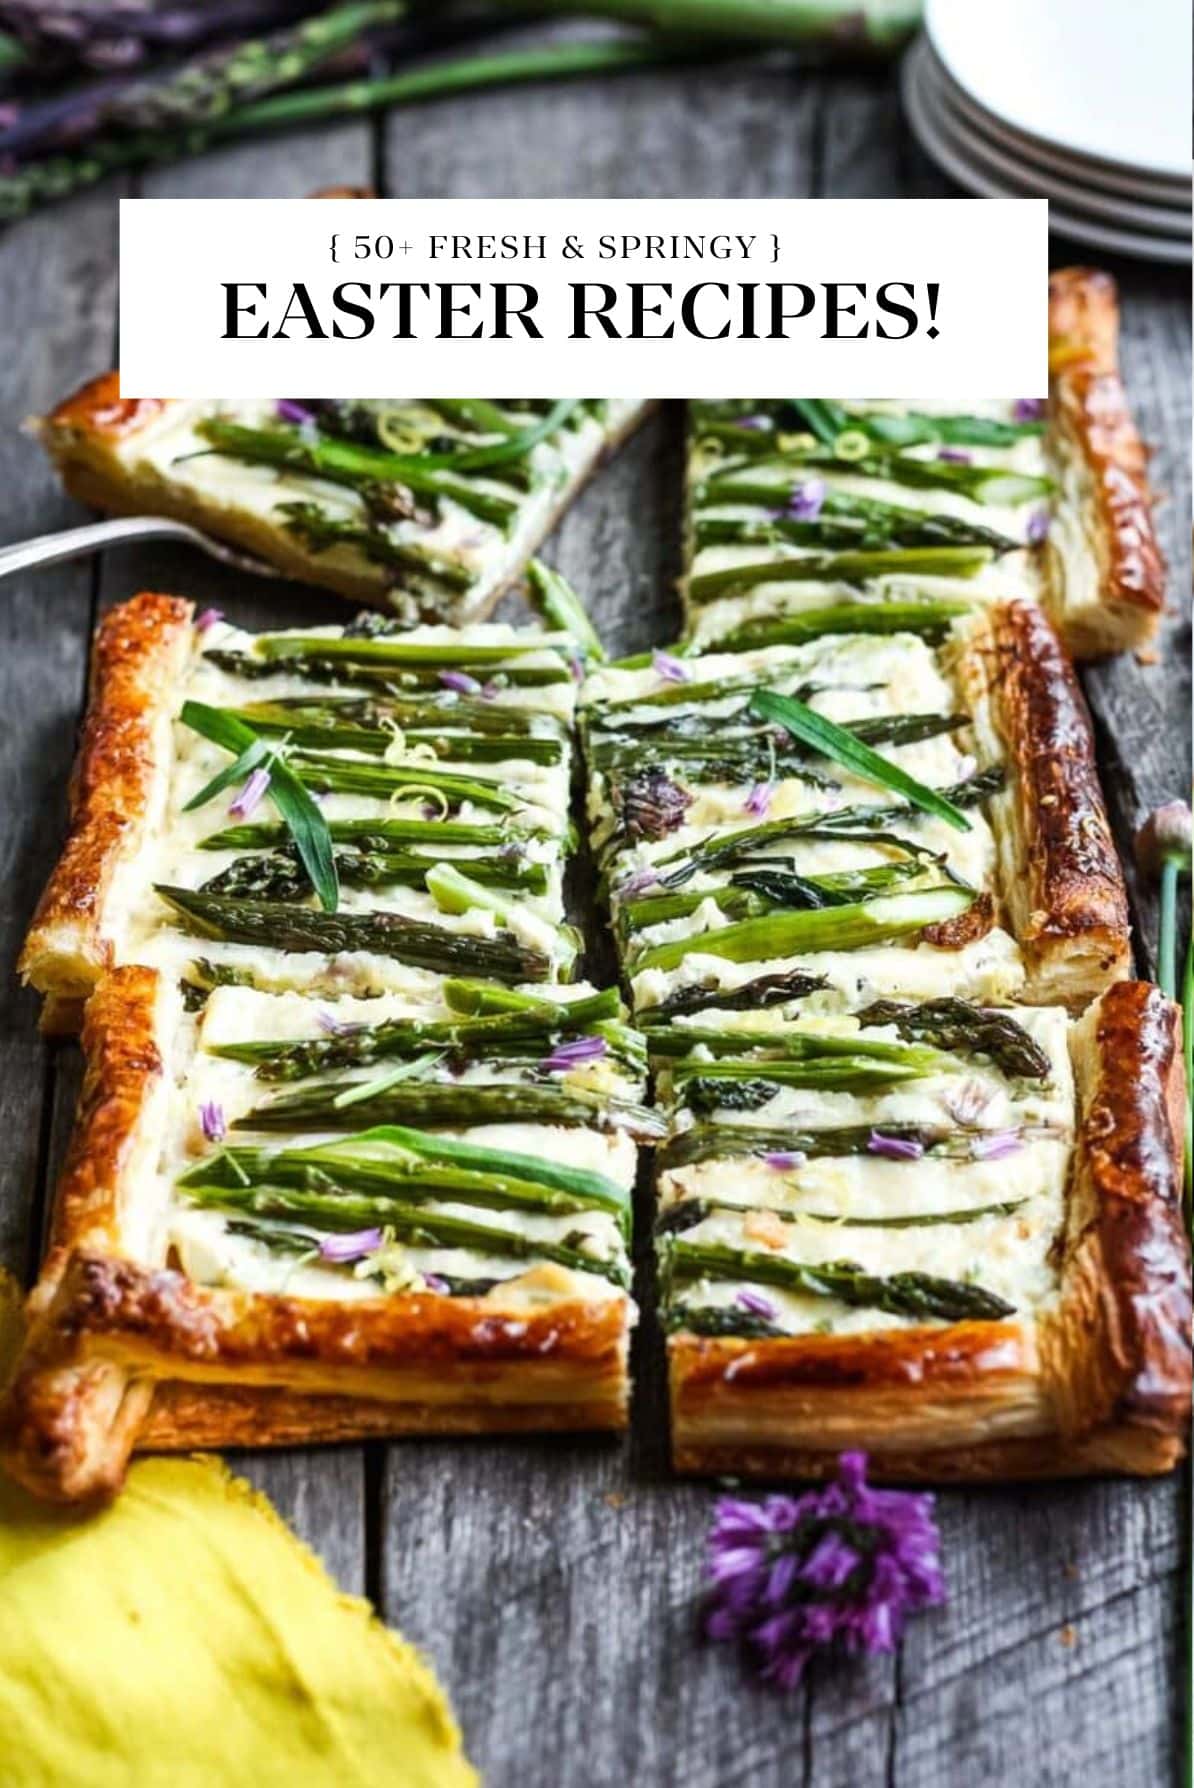 Create an Easter Feast with these 50+ Easter Dinner Ideas. You'll find lots of inspiration here, from classic Easter mains to Easter side dishes, Easter salads, and dreamy Easter dessert recipes. Going plant-based this Easter? We have you covered! Please scroll down for some of our most popular vegan & vegetarian Easter recipes!